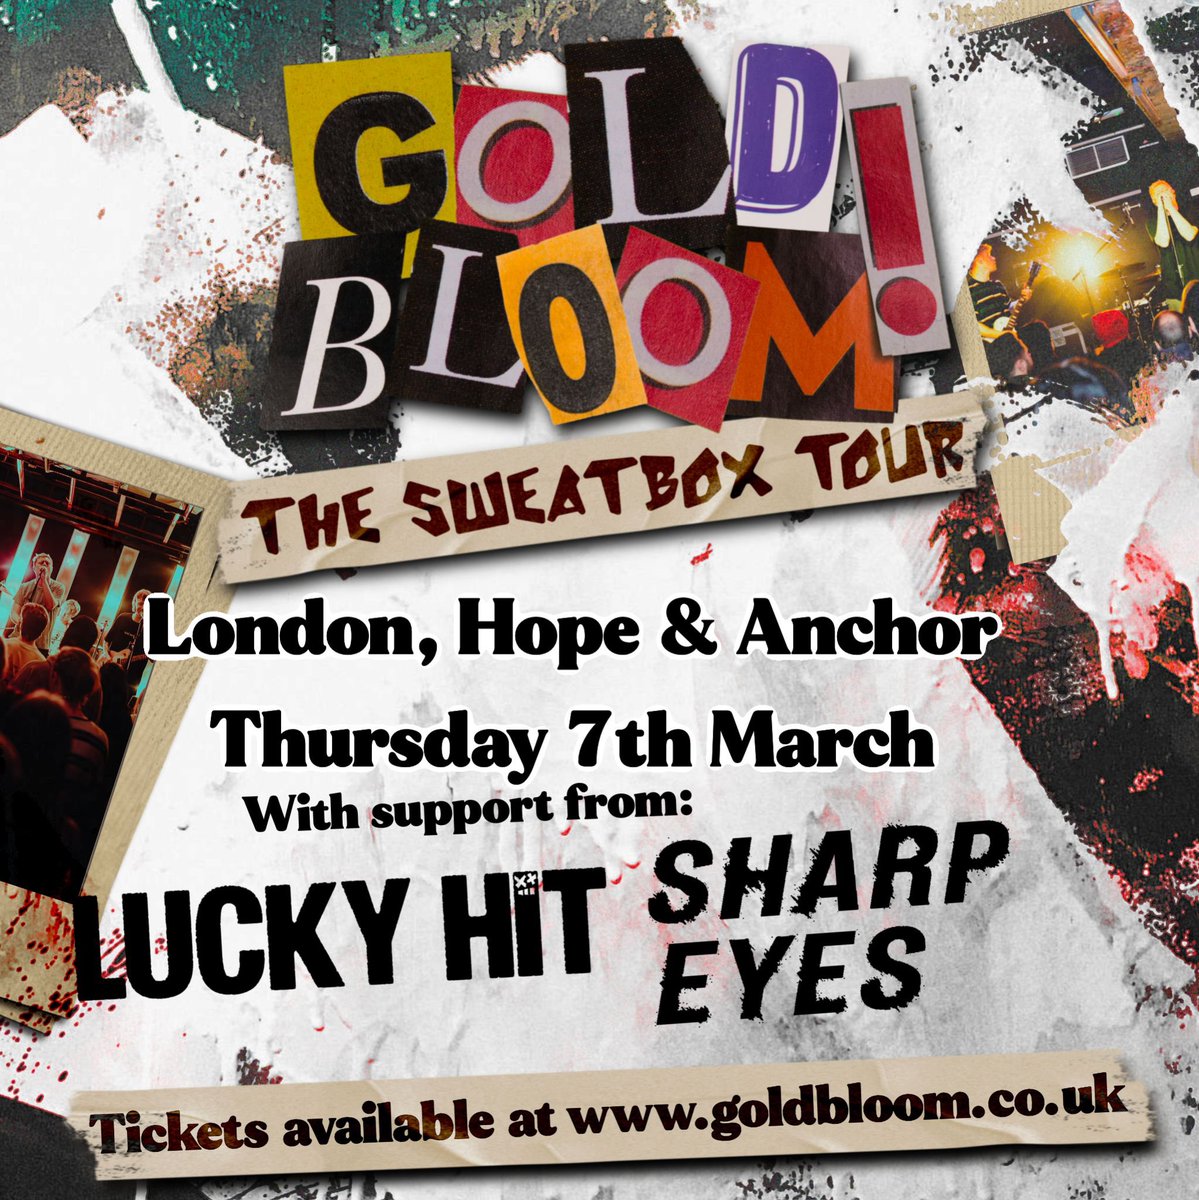 Stoked to be joining a sick night with @goldbloomuk & @SharpEyesUK on Thursday 7th March at the Hope & Anchor 🤘🏻 If you are into your pop punk you won’t wanna miss this one. It’s going to be a huge party 🍻